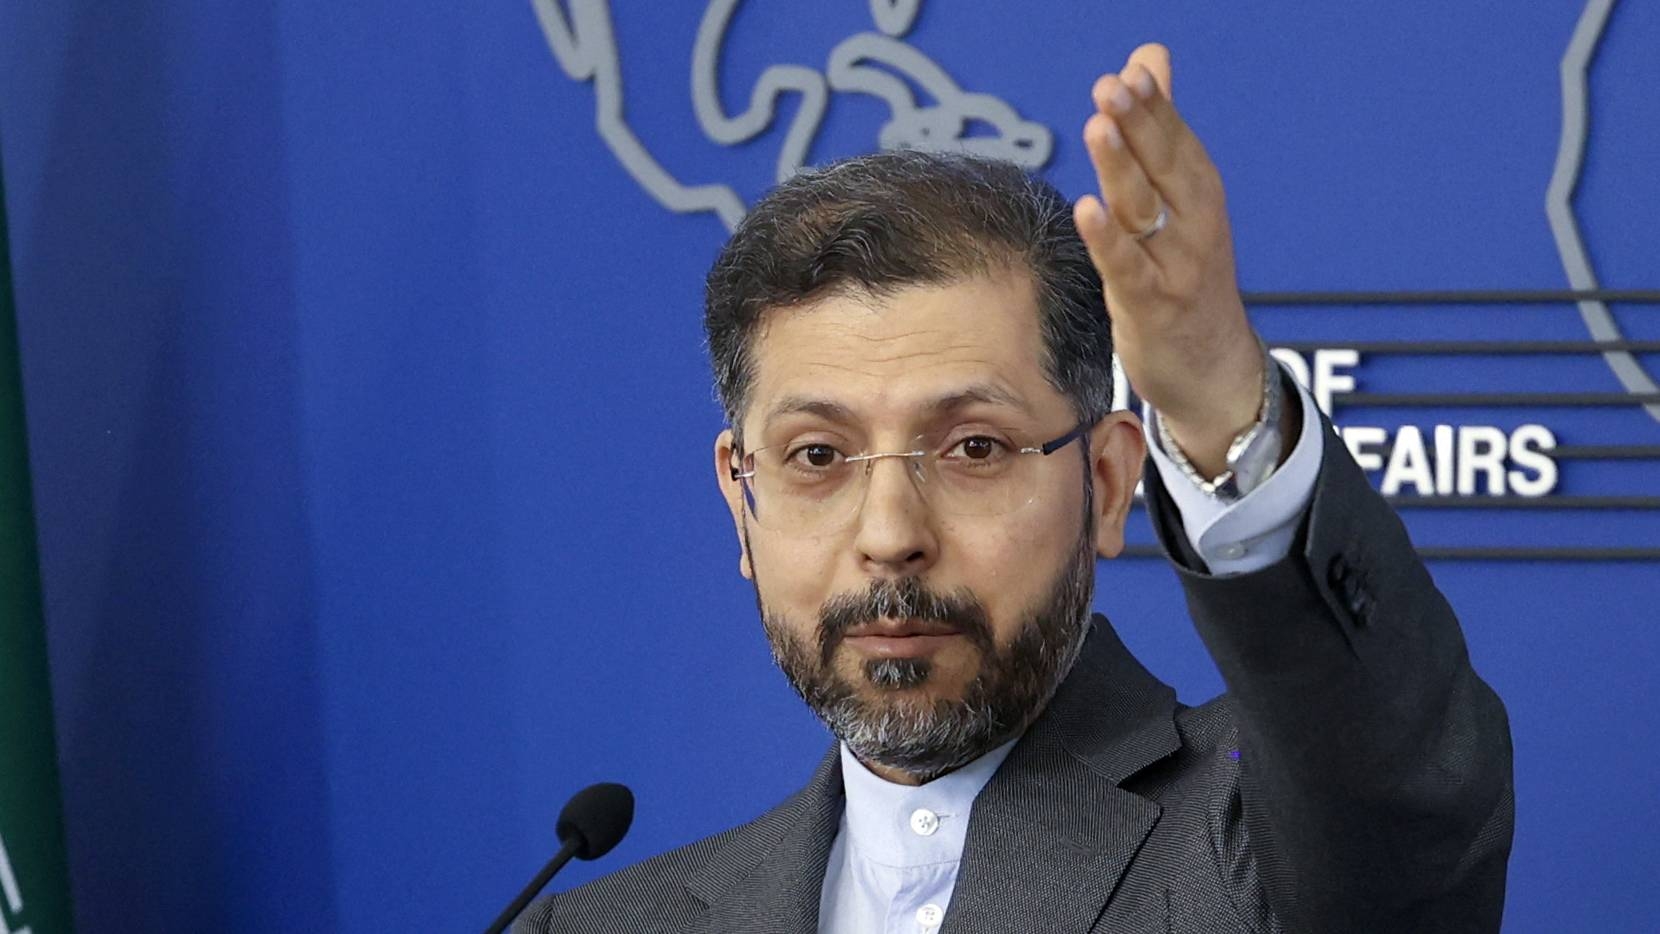 Iran's Foreign Ministry spokesman Saeed Khatibzadeh speaks to media during a press conference in Tehran, on 11 April 2022.